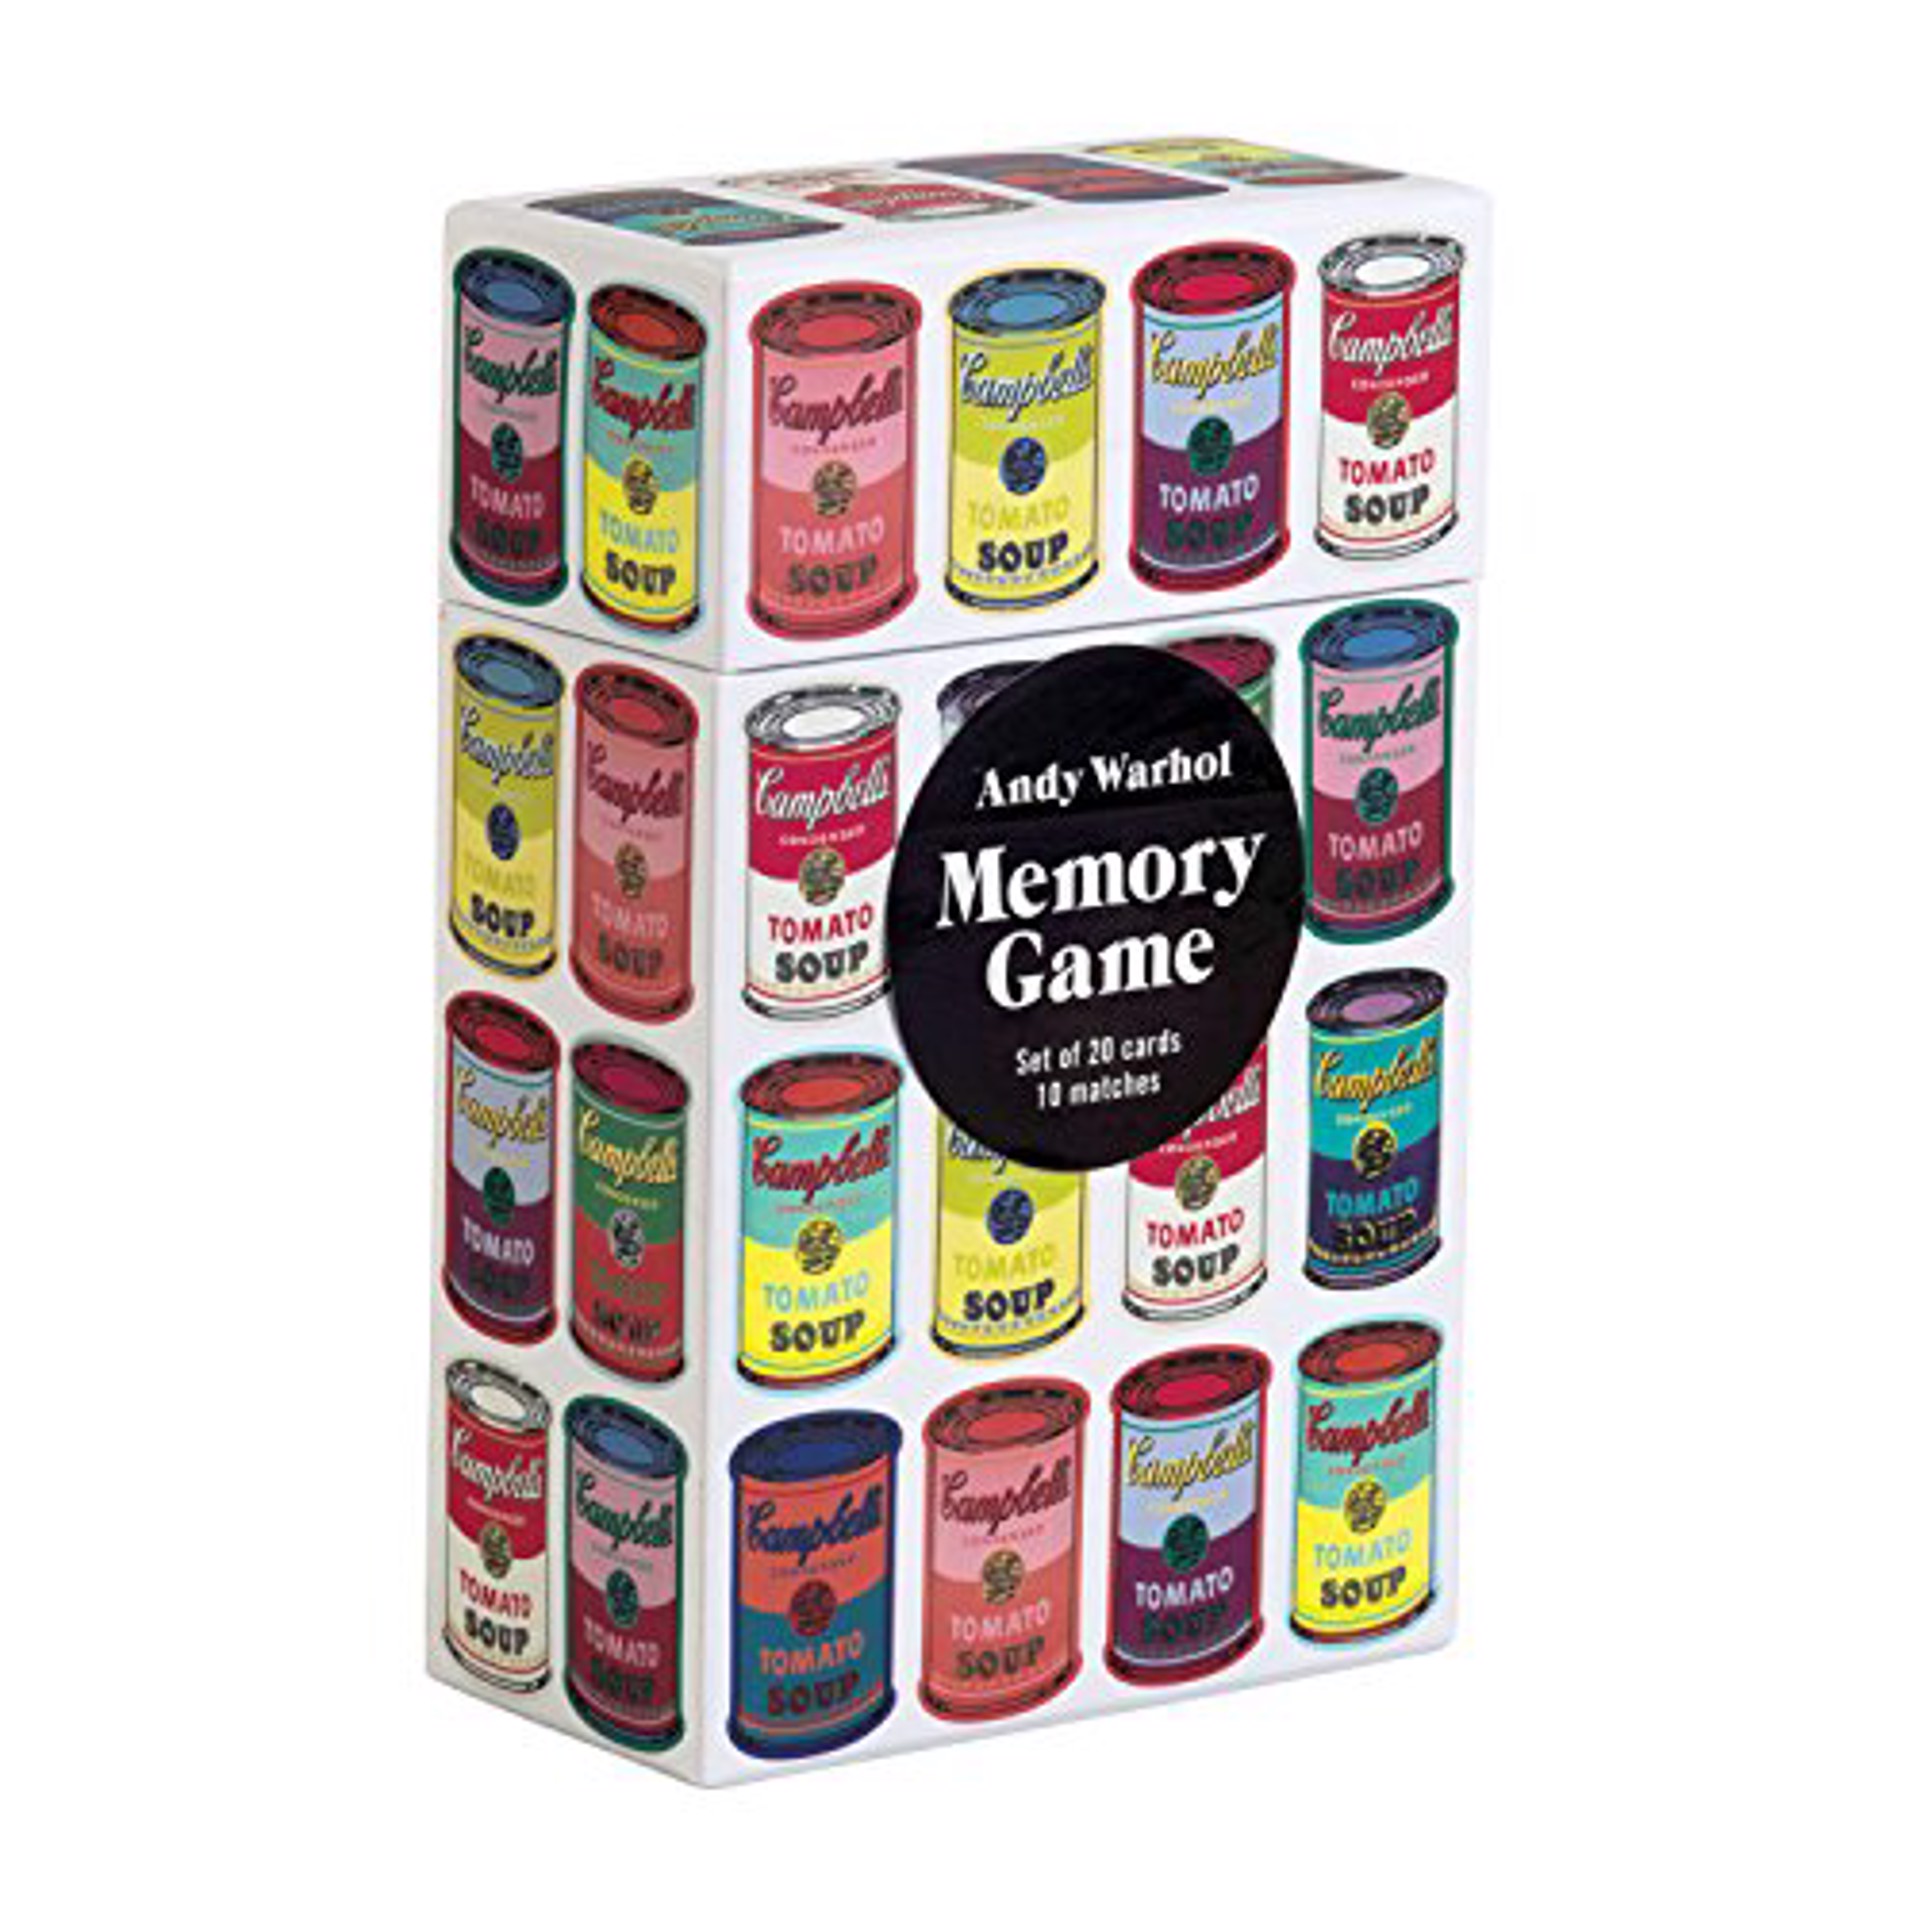 Memory Game by Andy Warhol